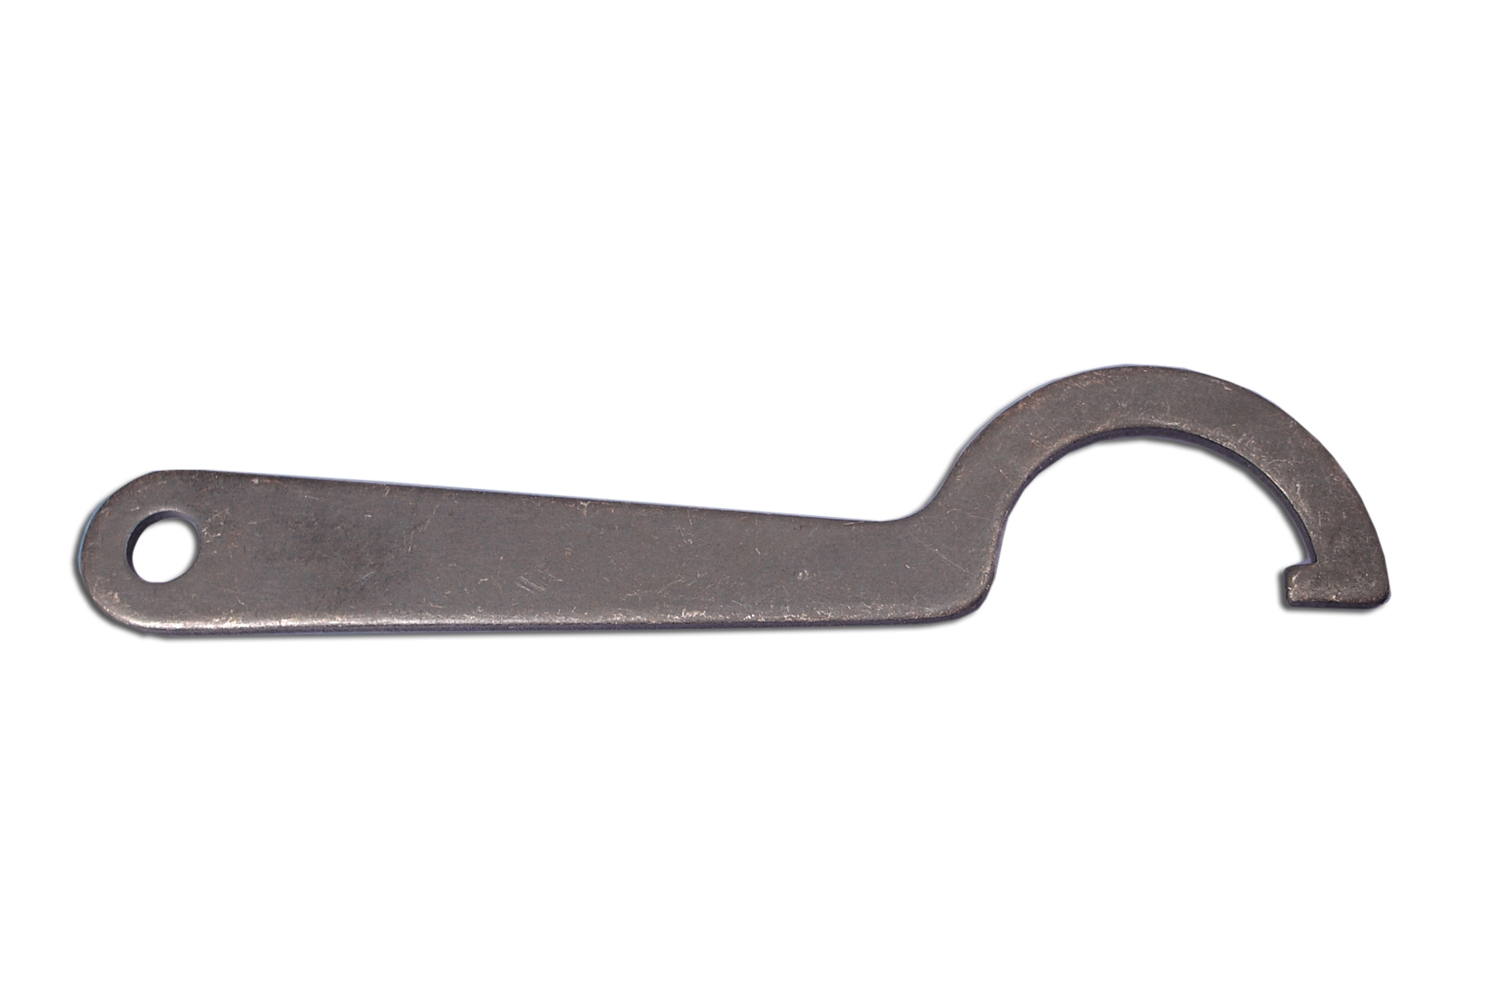 Lap Head Spanner Wrench Tool